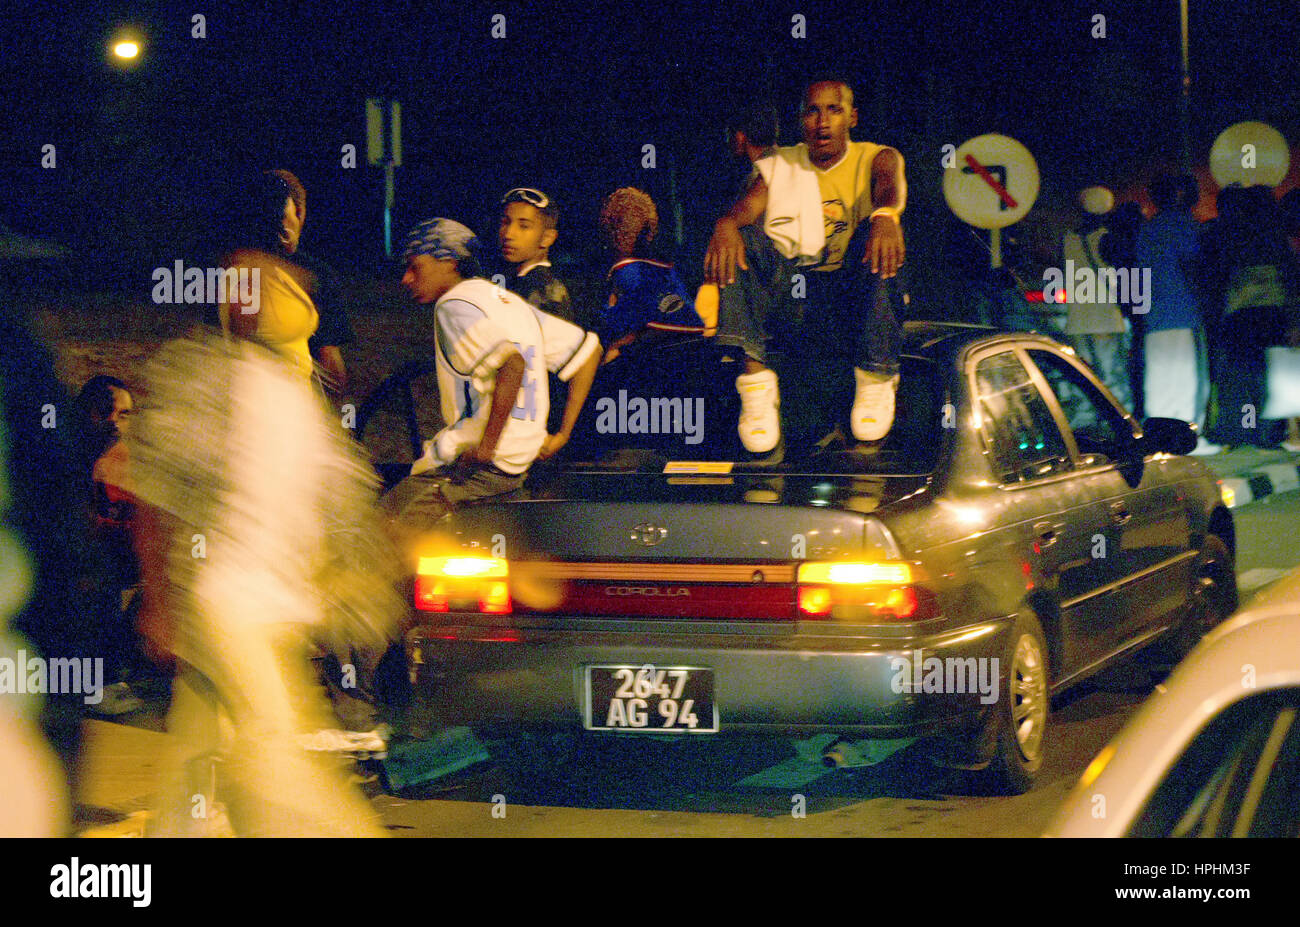 Mauritius, young Mauritians on the street waiting for admission in a disco, teenagers in front of their car, teenager, young men from Mauritius waitin Stock Photo